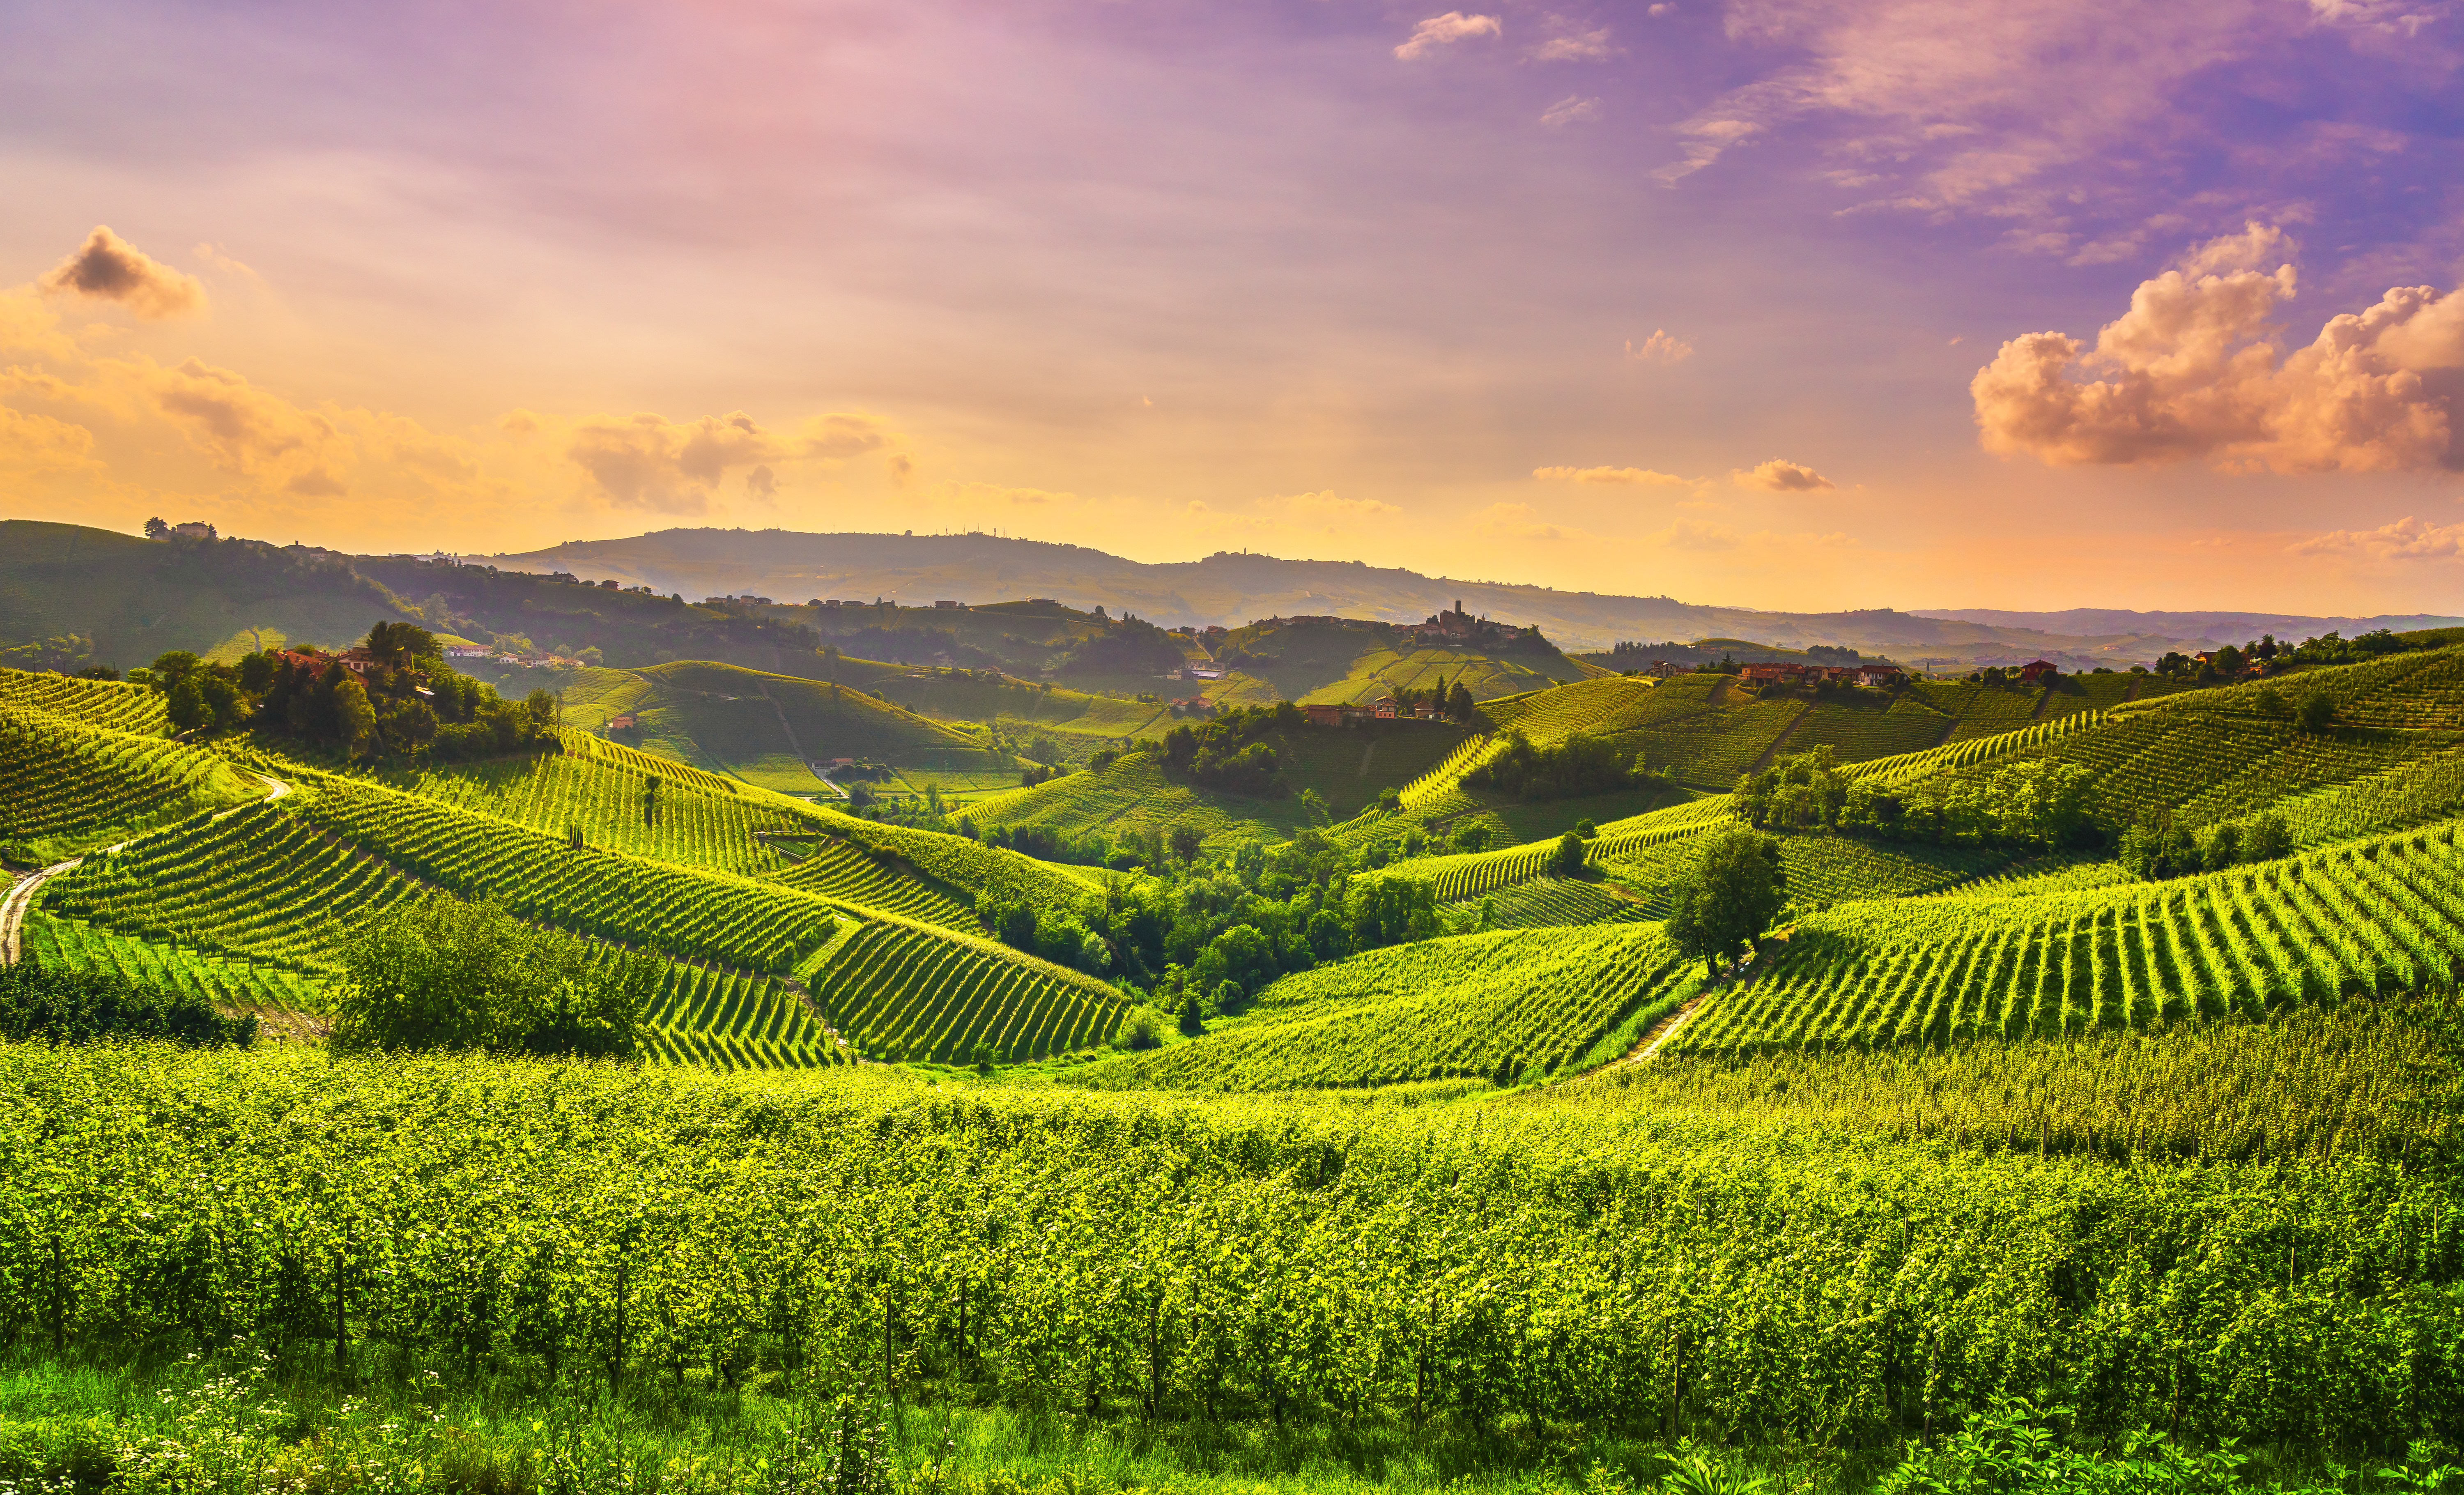 Langhe vineyards sunset panorama, Castiglione Falletto and La Morra, Unesco Site, Piedmont, Northern Italy Europe.